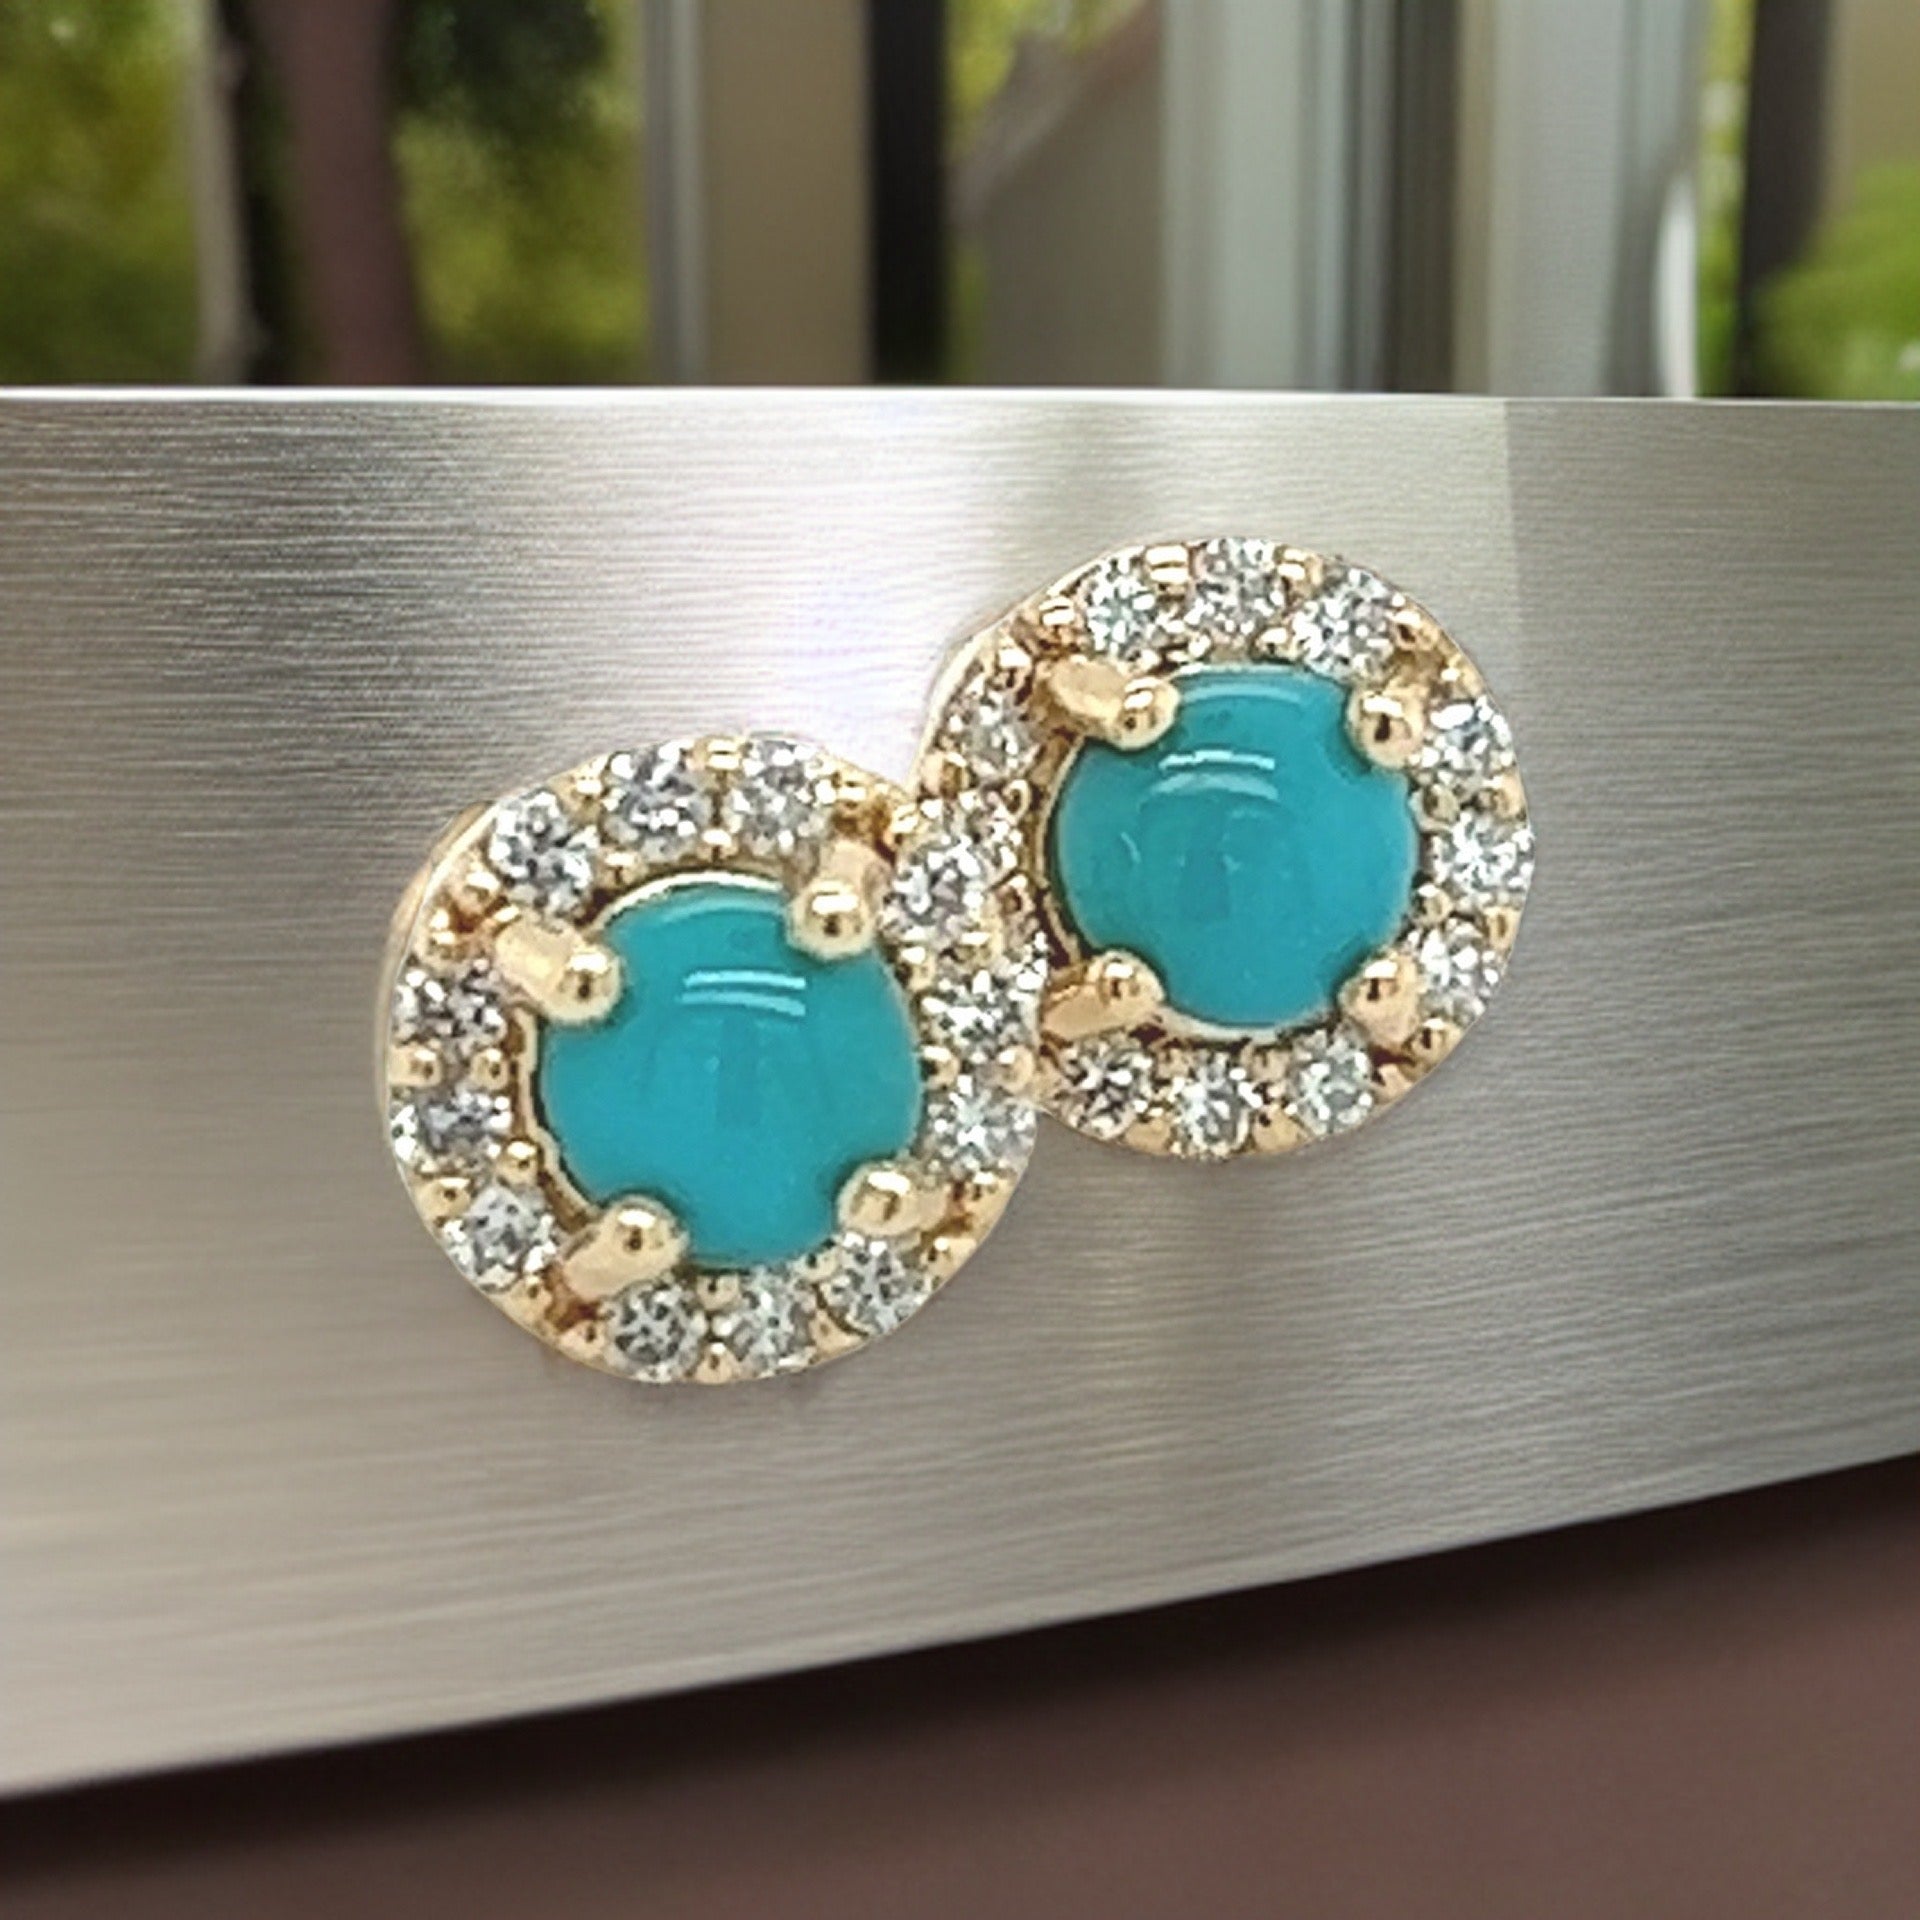 Natural Turquoise Diamond Stud Earrings 14k Yellow Gold 0.65 TCW Certified $1,590 217840 - Certified Fine Jewelry